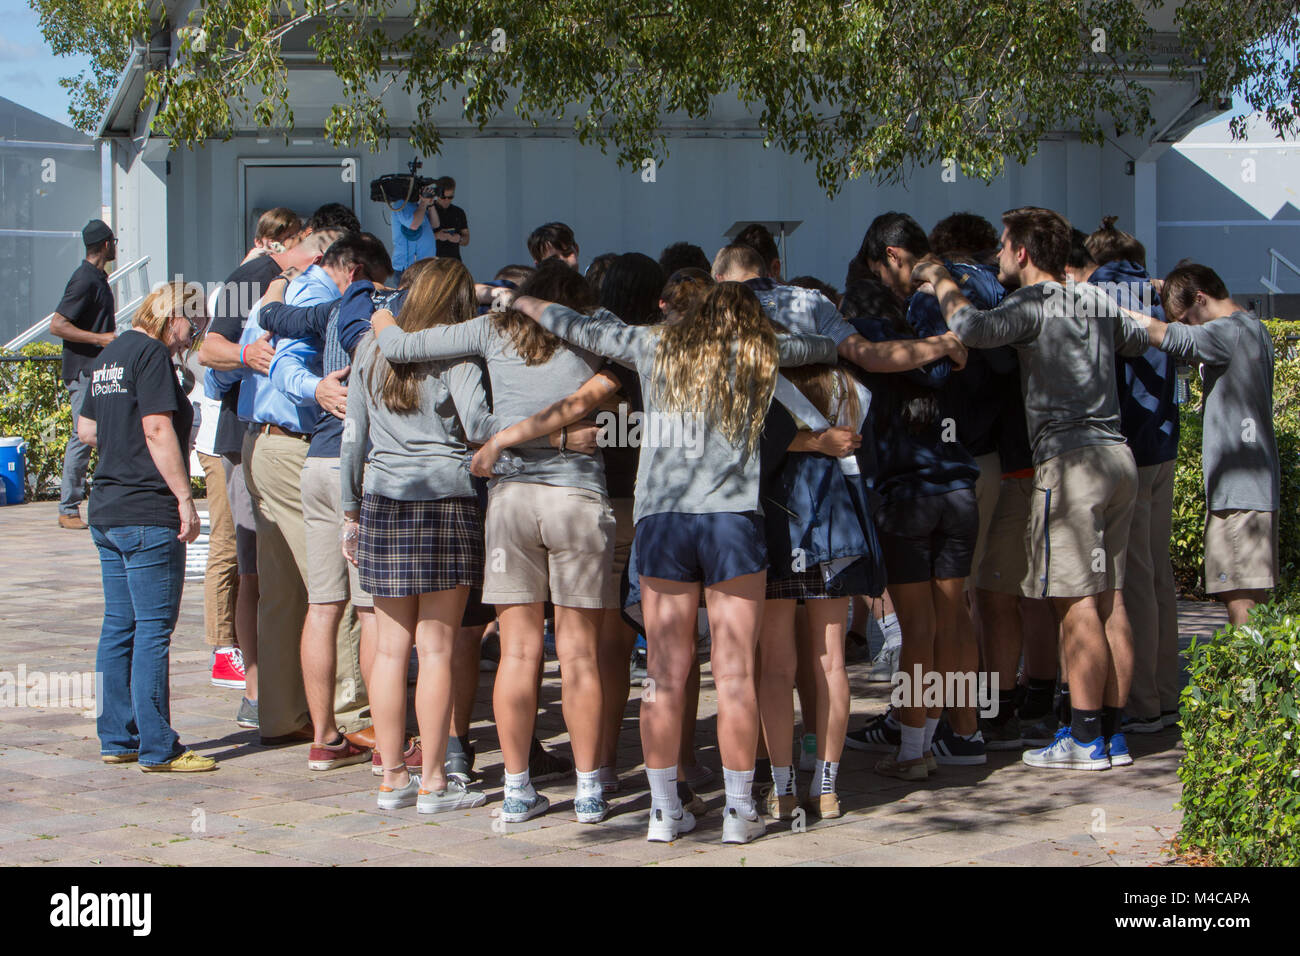 Parkland, USA. 15th Feb, 2018. Community members share an emotional moment during a daytime prayer vigil at Parkridge Church in Parkland, Florida, the United States, on Feb. 15, 2018. A total of 17 people were killed and over a dozen others were wounded after a 19-year-old gunman opened fire Wednesday at the high school, authorities said. Credit: Monica McGivern/Xinhua/Alamy Live News Stock Photo